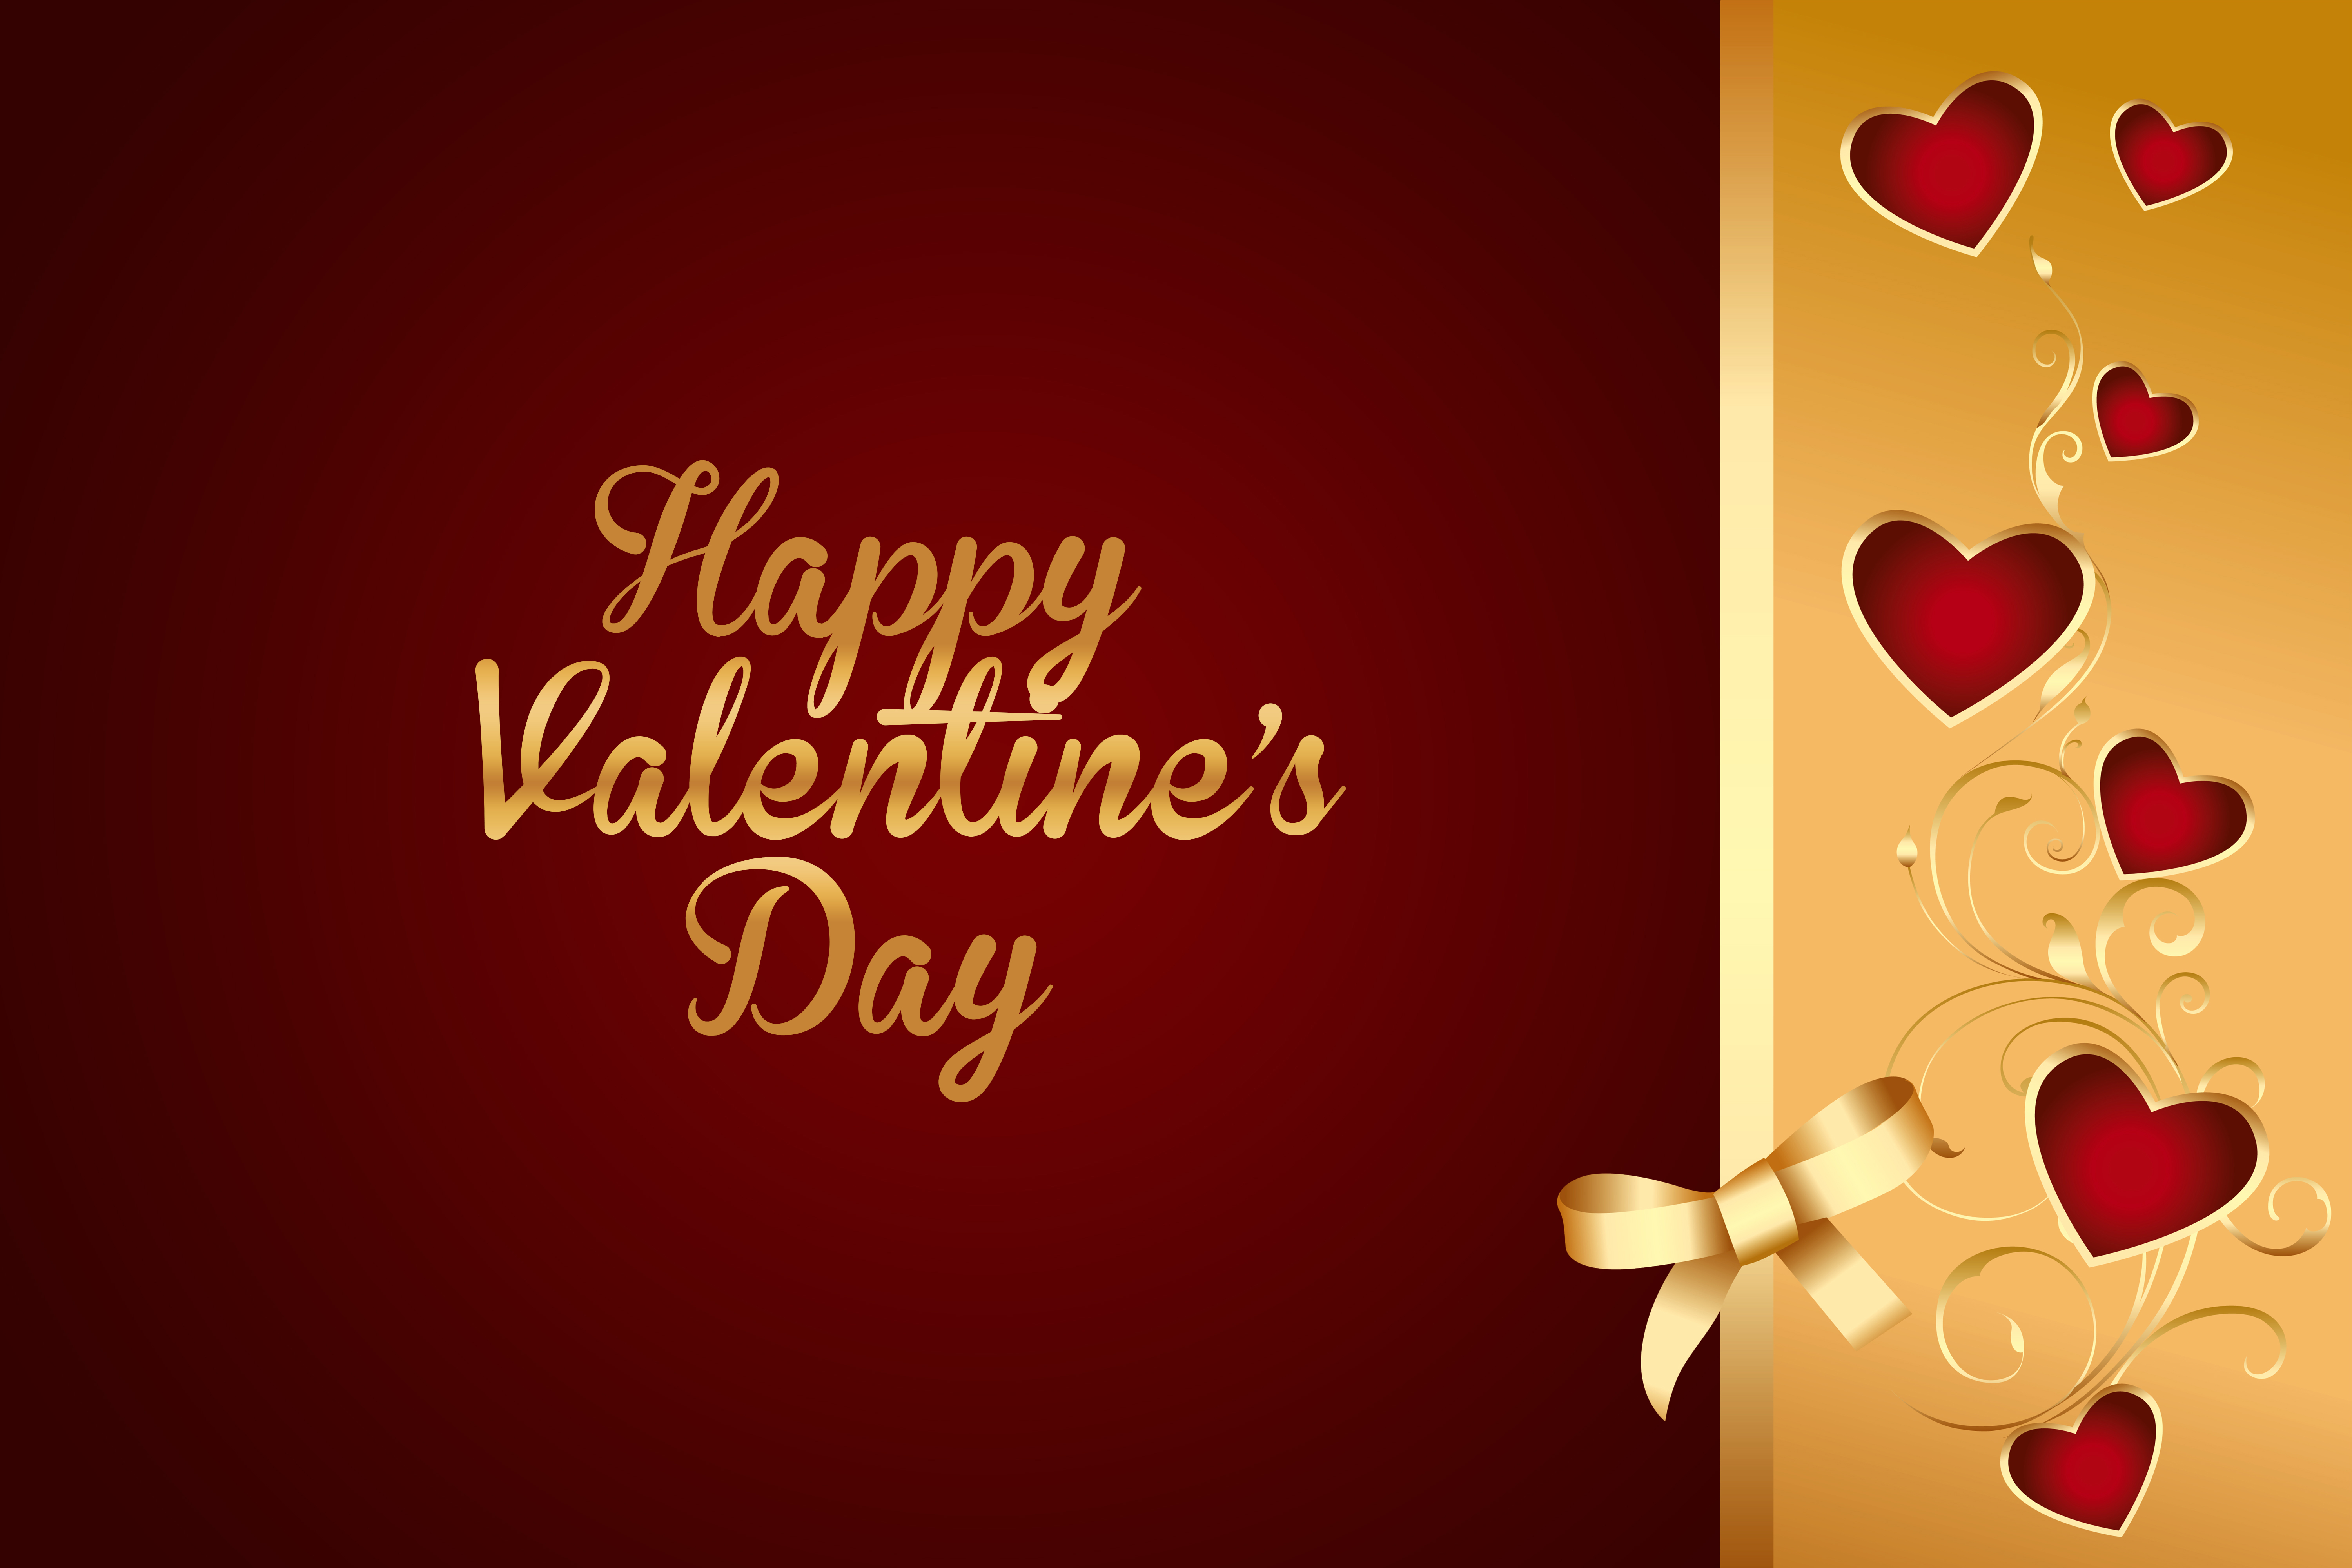 Have a valentine s day. Открытки Valentine's Day. Happy Valentine's Day картинки.